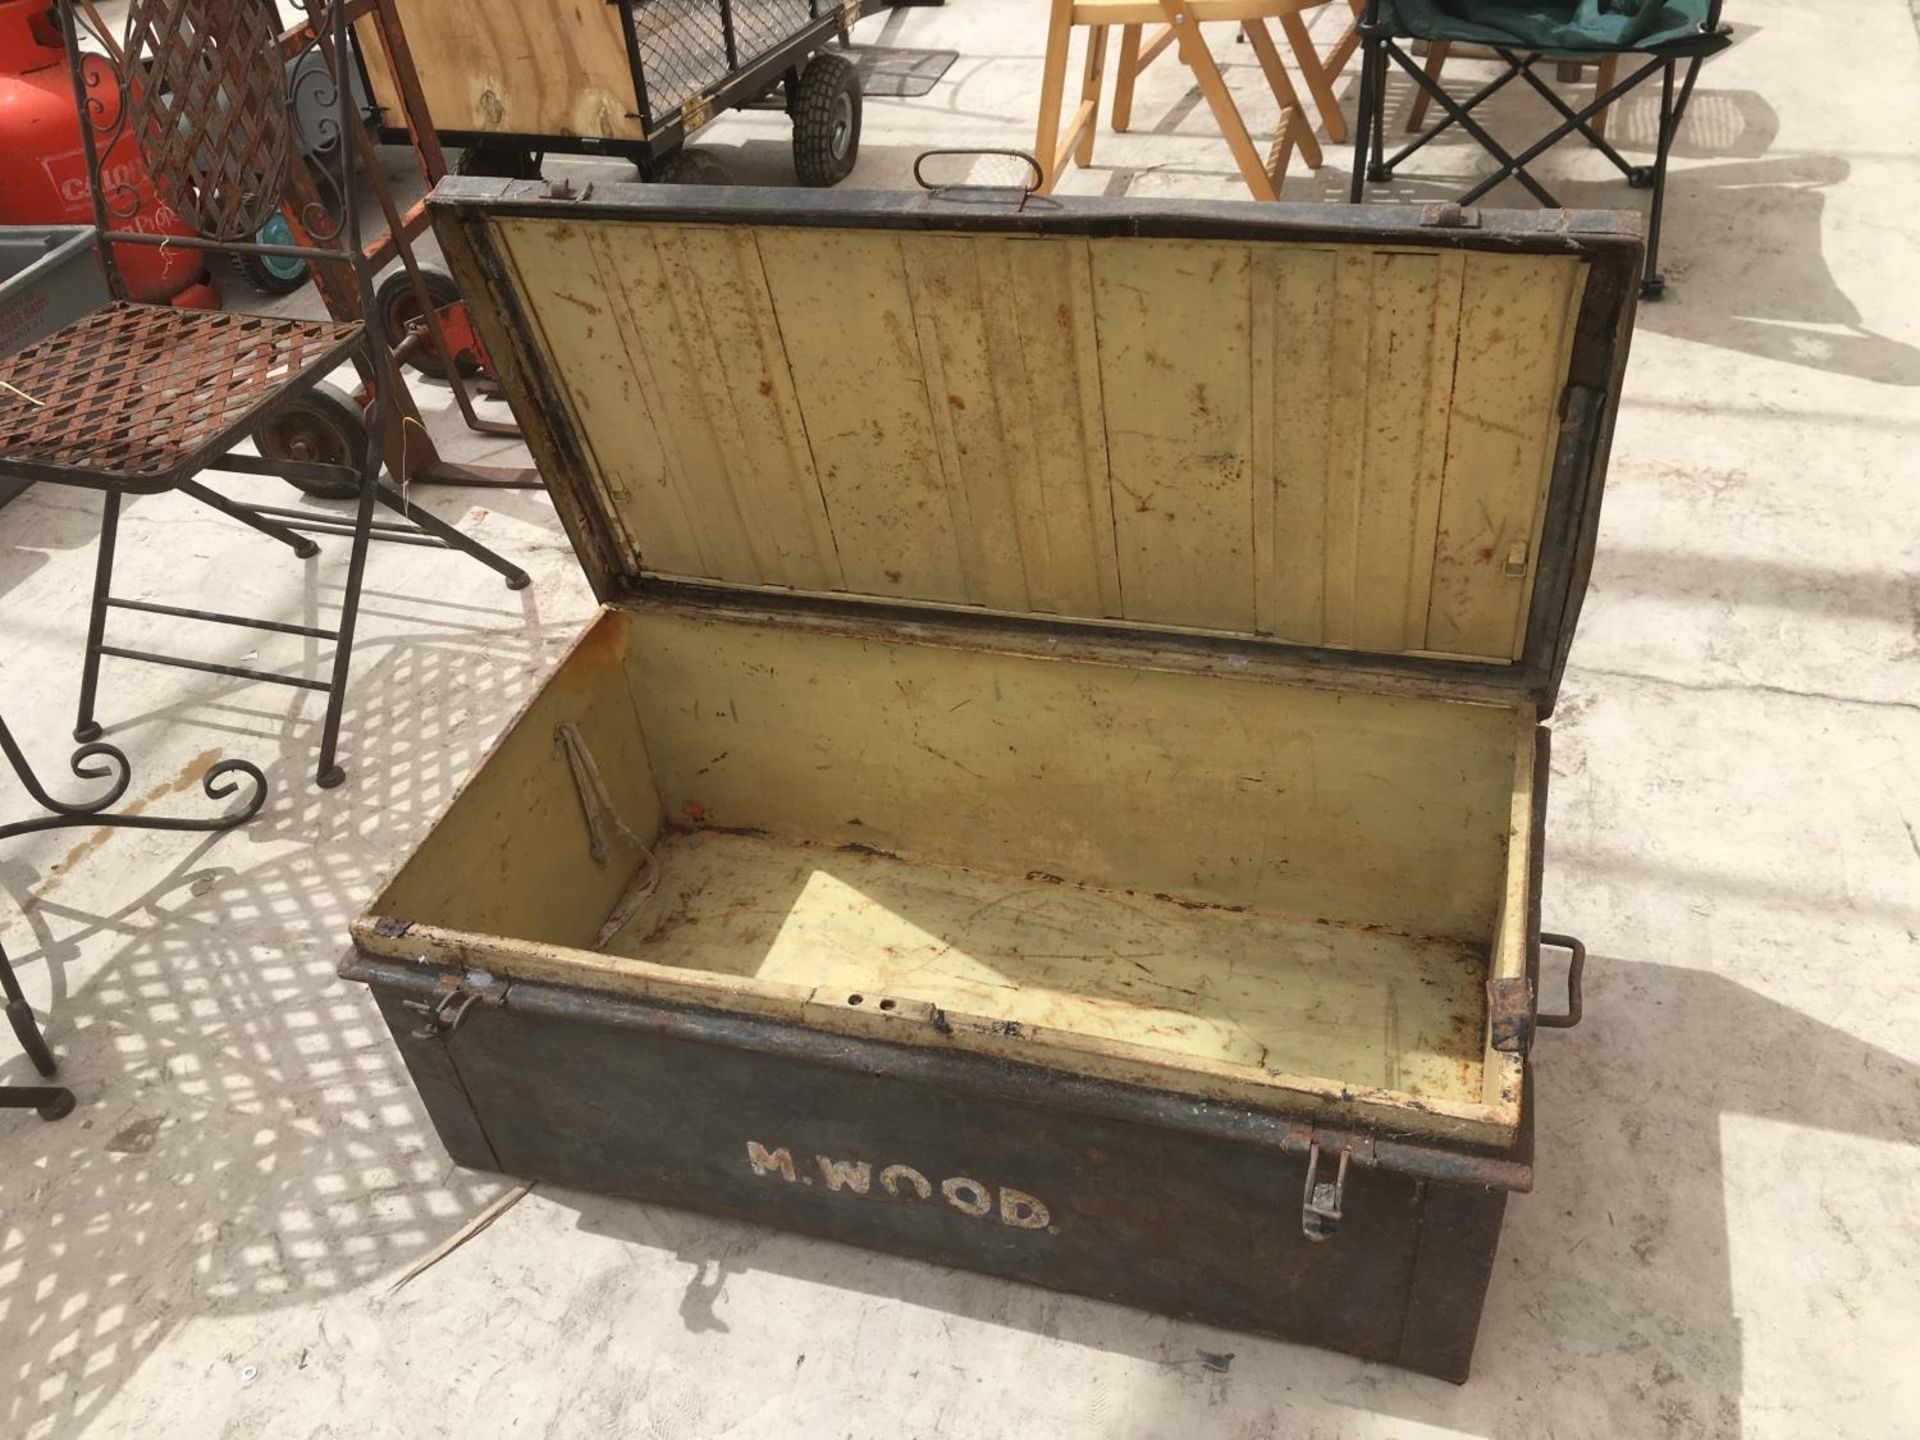 A VINTAGE METAL CHEST WITH 'M WOOD' - Image 2 of 2